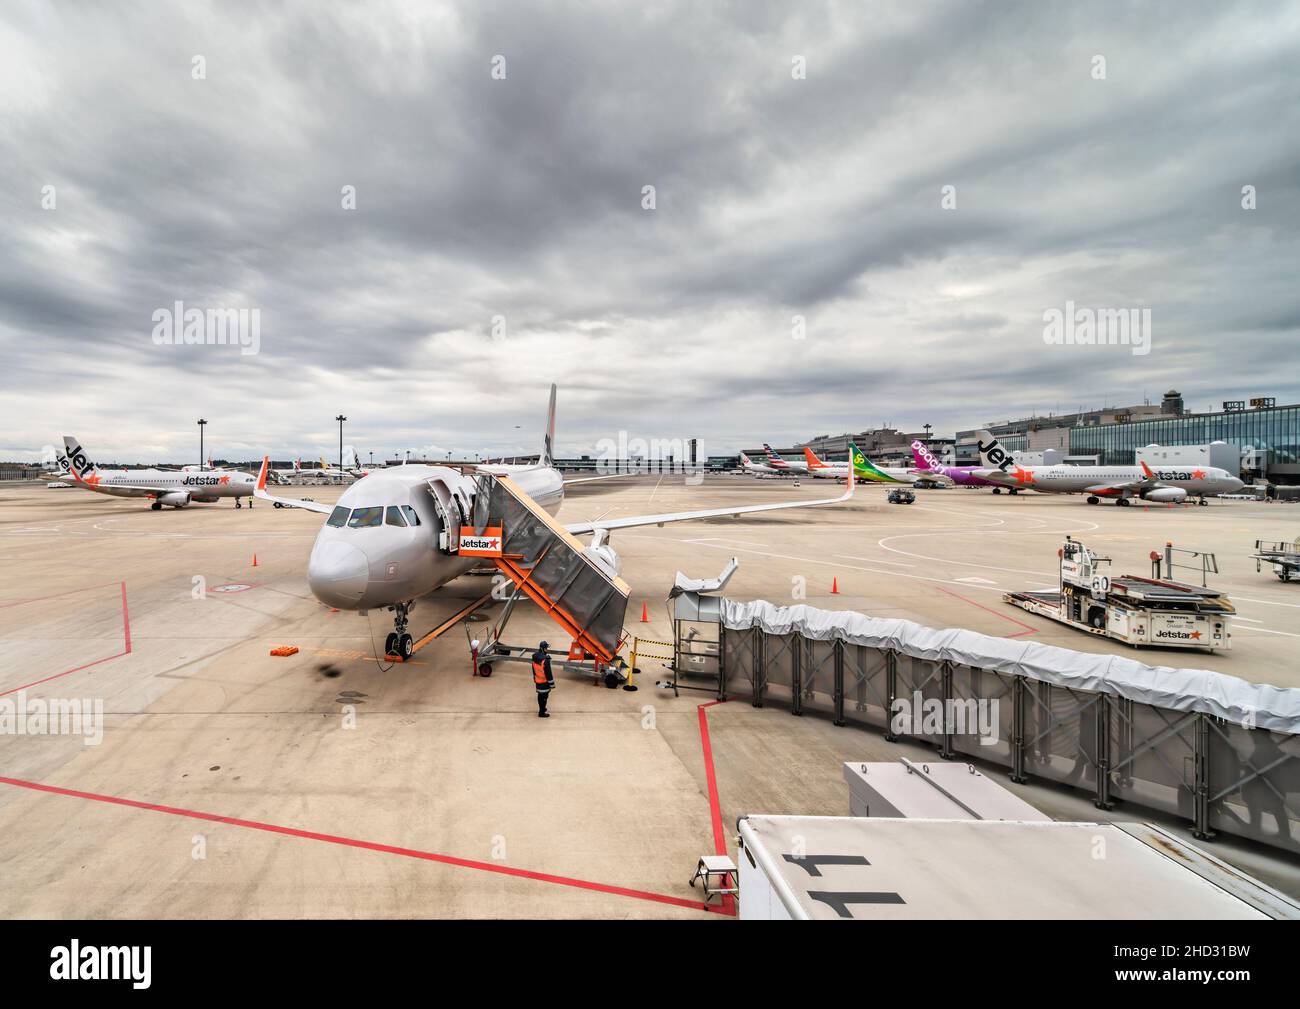 tokyo, japan - december 06 2021: Airbus plane from Japanese low-cost carrier airline jetstar airways boarding passengers on the apron or tarmac of the Stock Photo